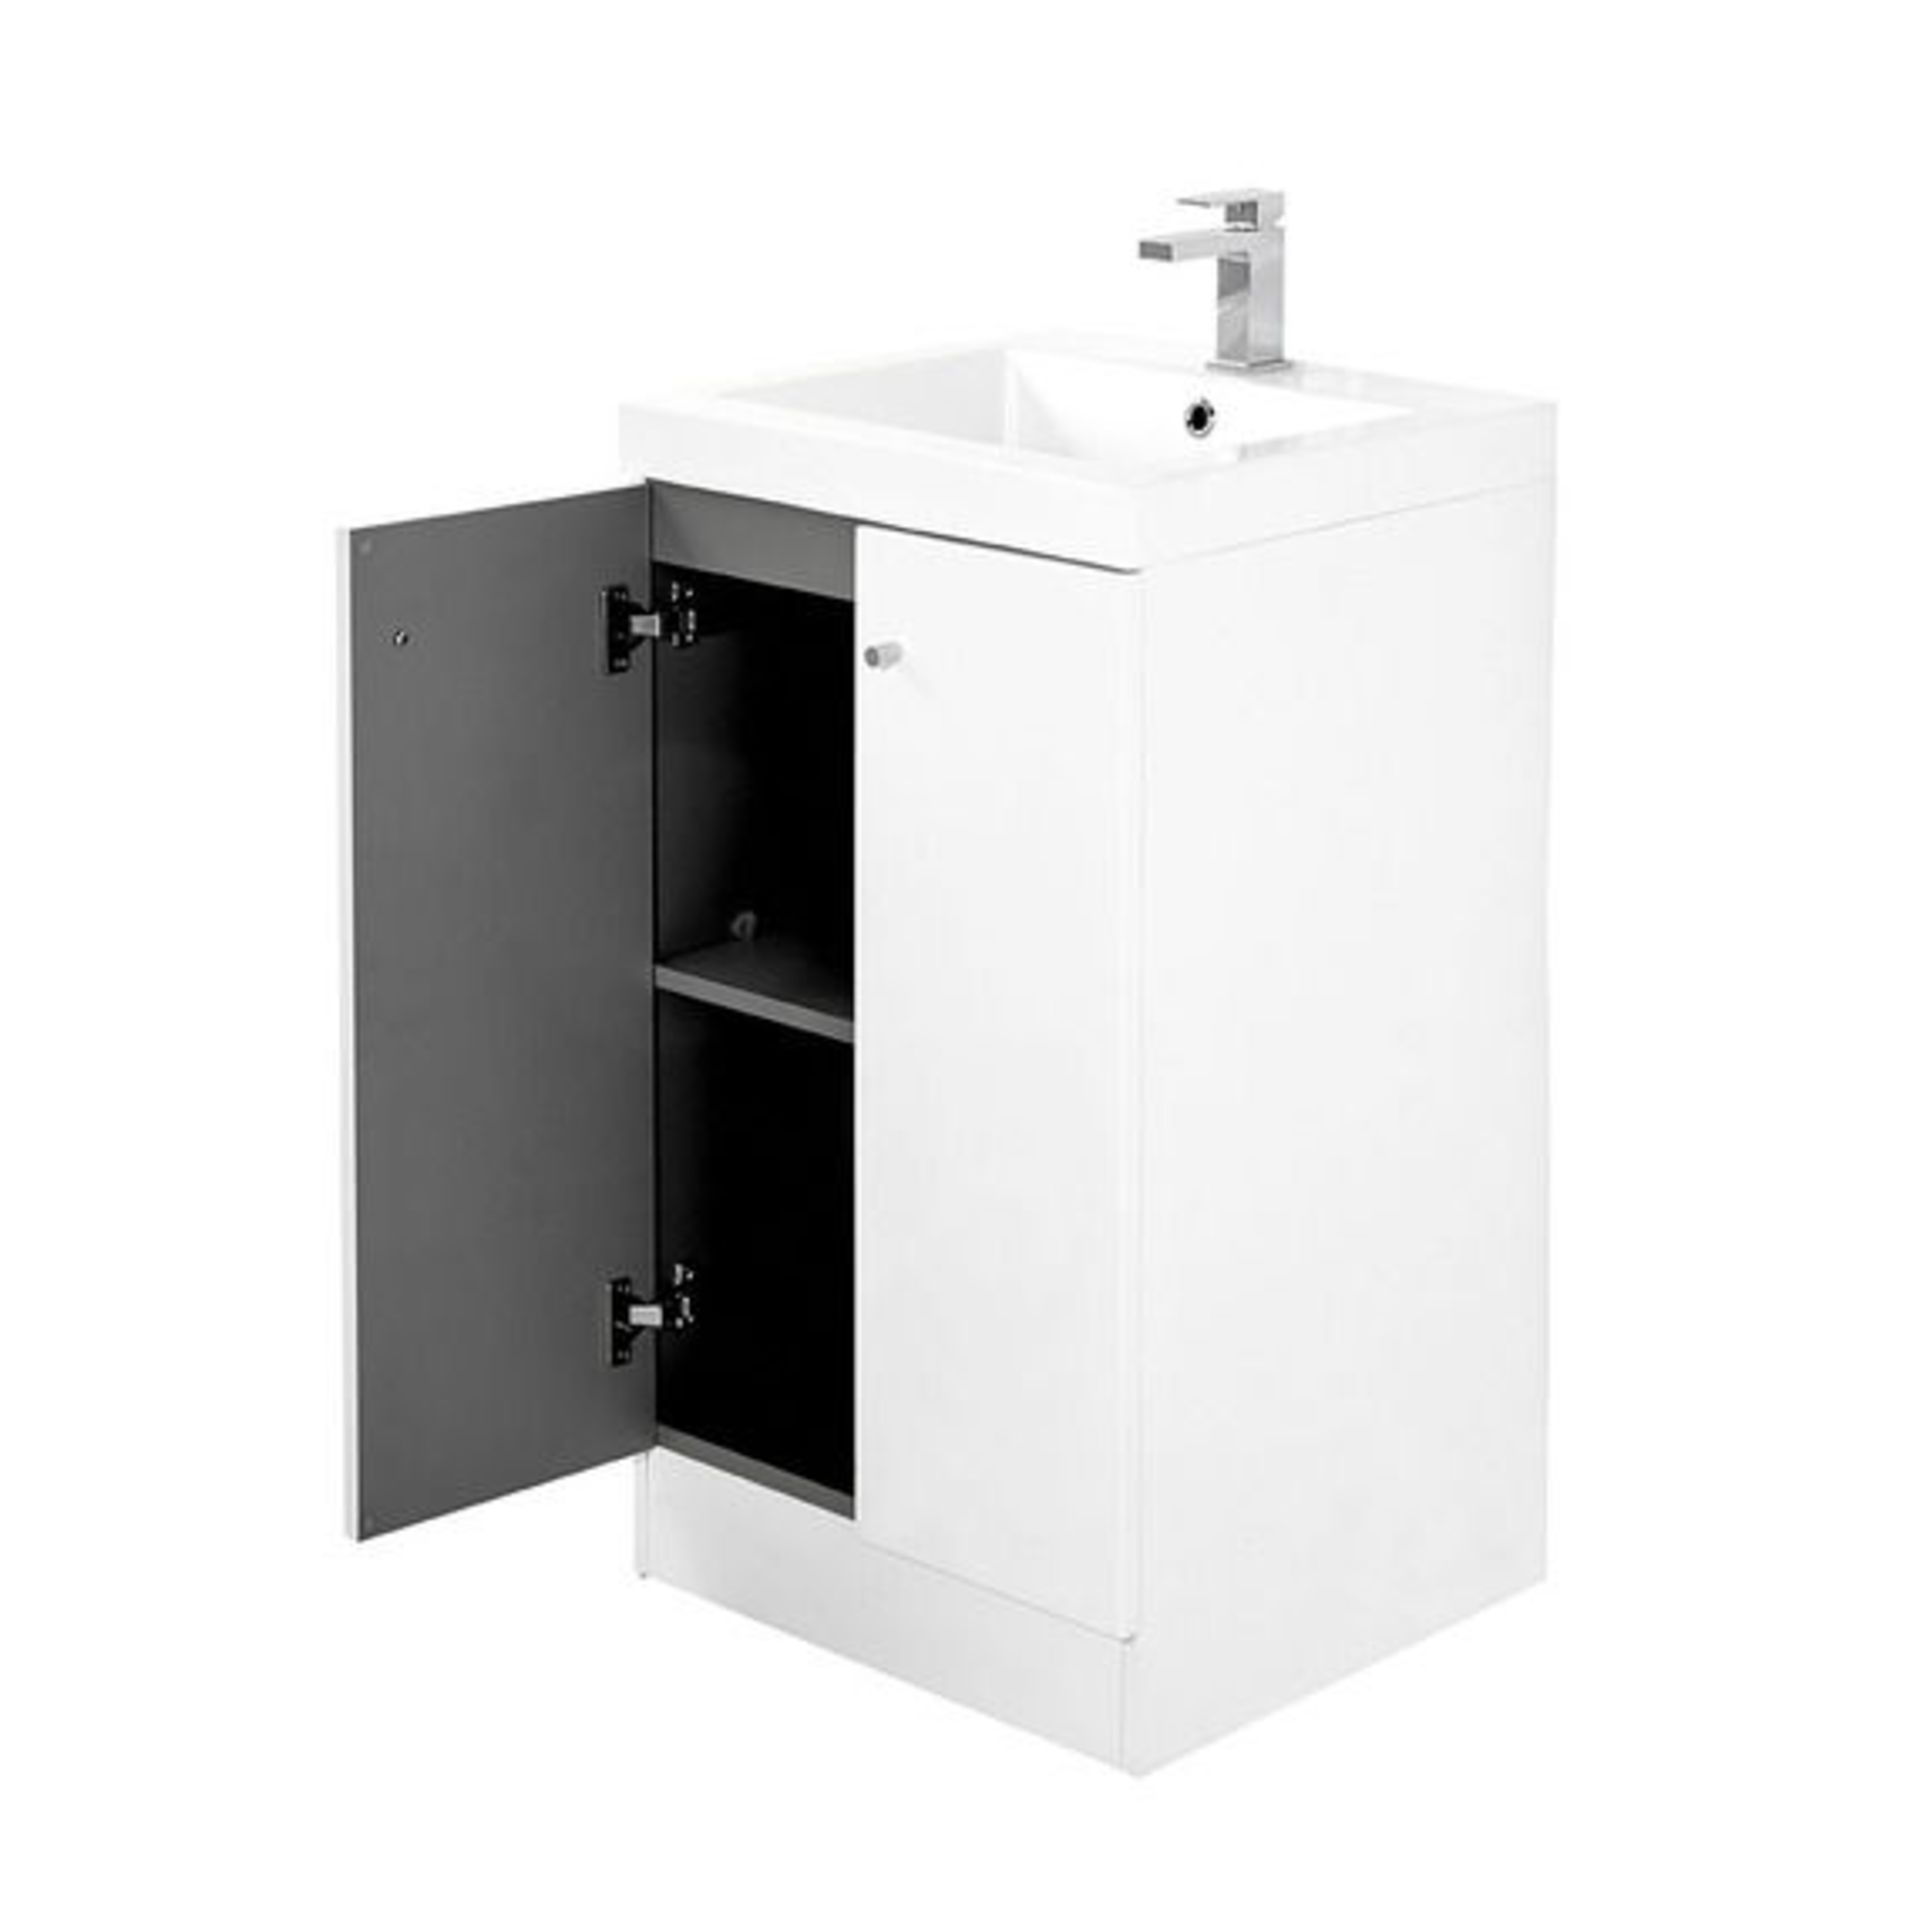 10 x Alpine Duo 500 Floor Standing Vanity Unit - Gloss White - Brand New Boxed Stock - Dimensions: - Image 2 of 4